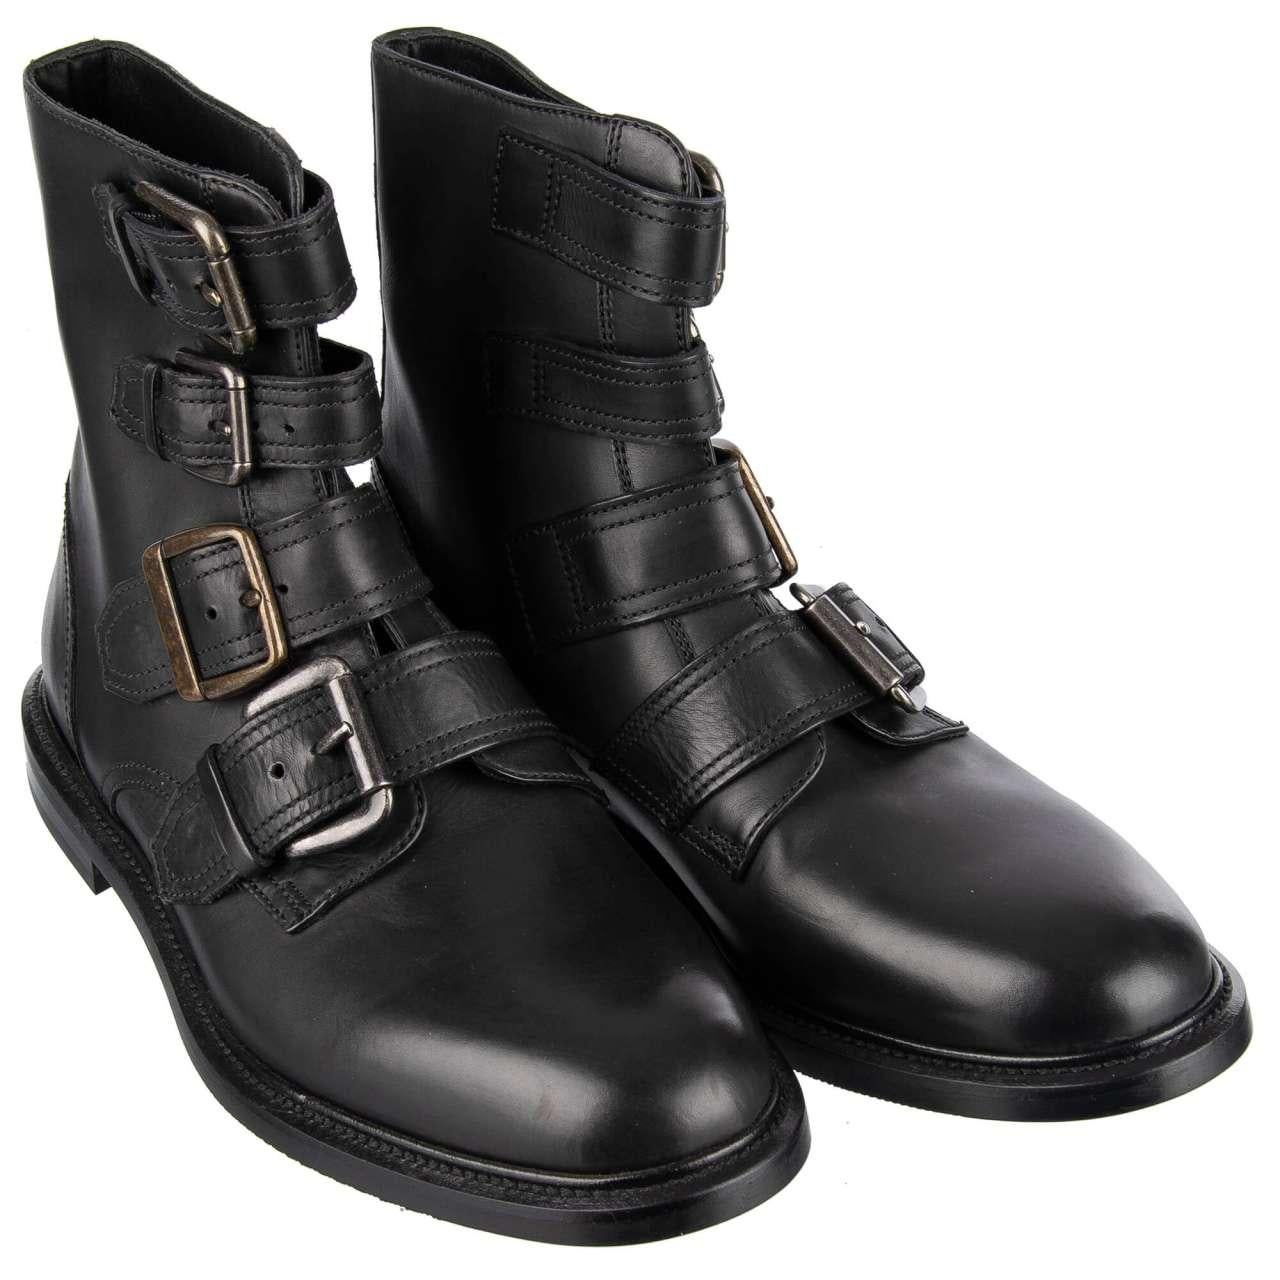 Dolce & Gabbana - Ankle Boots with Buckles MARSALA Black EUR 42 For Sale 1